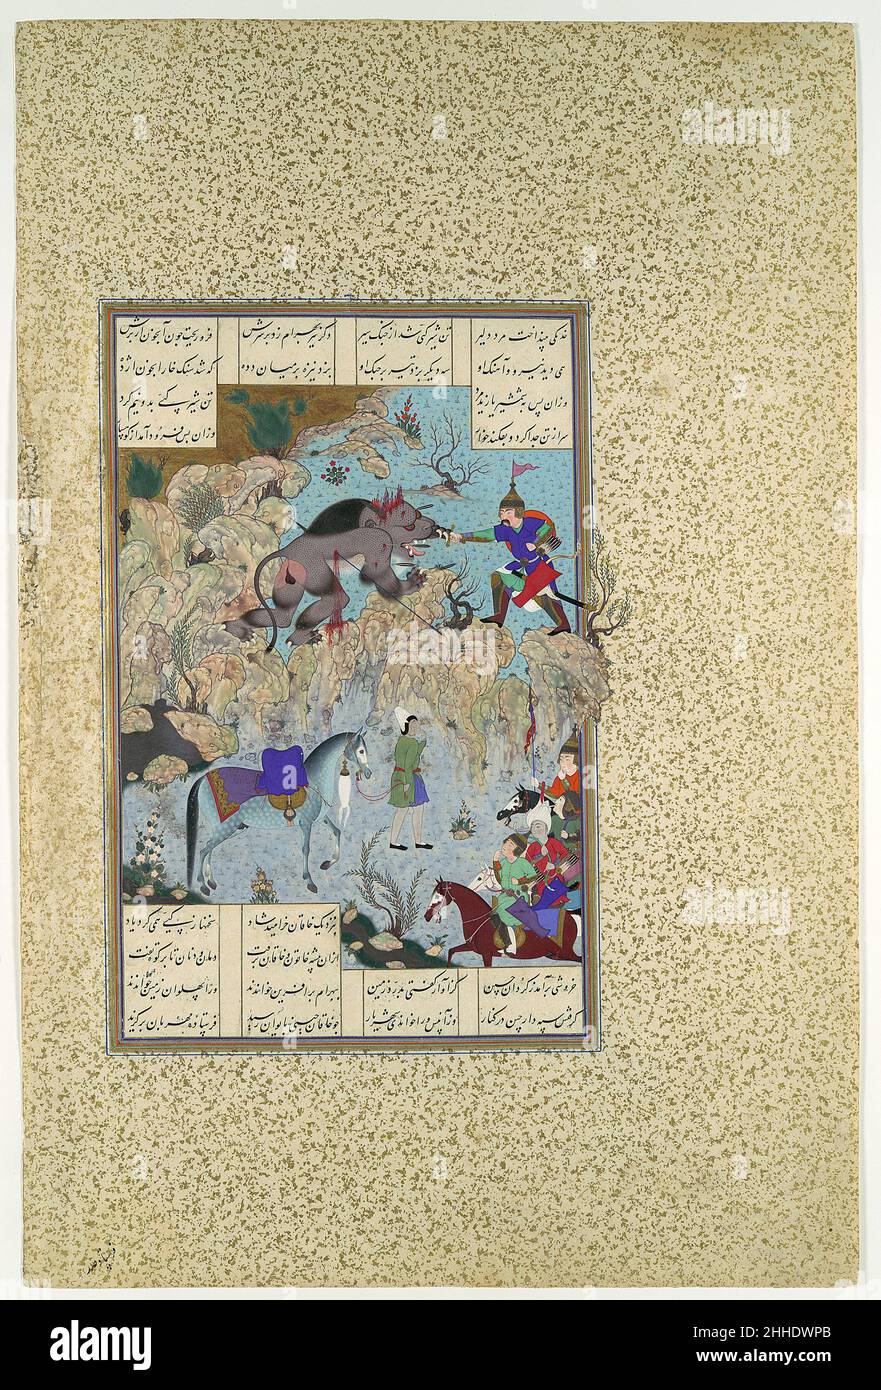 'Bahram Chubina Slays the Lion-Ape', Folio 715v from the Shahnama (Book of Kings) of Shah Tahmasp ca. 1530–35 Abu'l Qasim Firdausi To thank the Khaqan of Chin for granting him safe haven, Bahram Chubina resolved to rid his host’s land of Kappi the lion-ape, a ferocious creature that had devoured the Khaqan’s daughter. Mir Musavvir delighted in the depiction of the red- and green-eyed monster, rendering every detail of its scaly skin and bloody wounds with fastidious care. The bystanders raise fingers to their lips in astonishment as Bahram Chubina delivers the coup de grace.. 'Bahram Chubina S Stock Photo